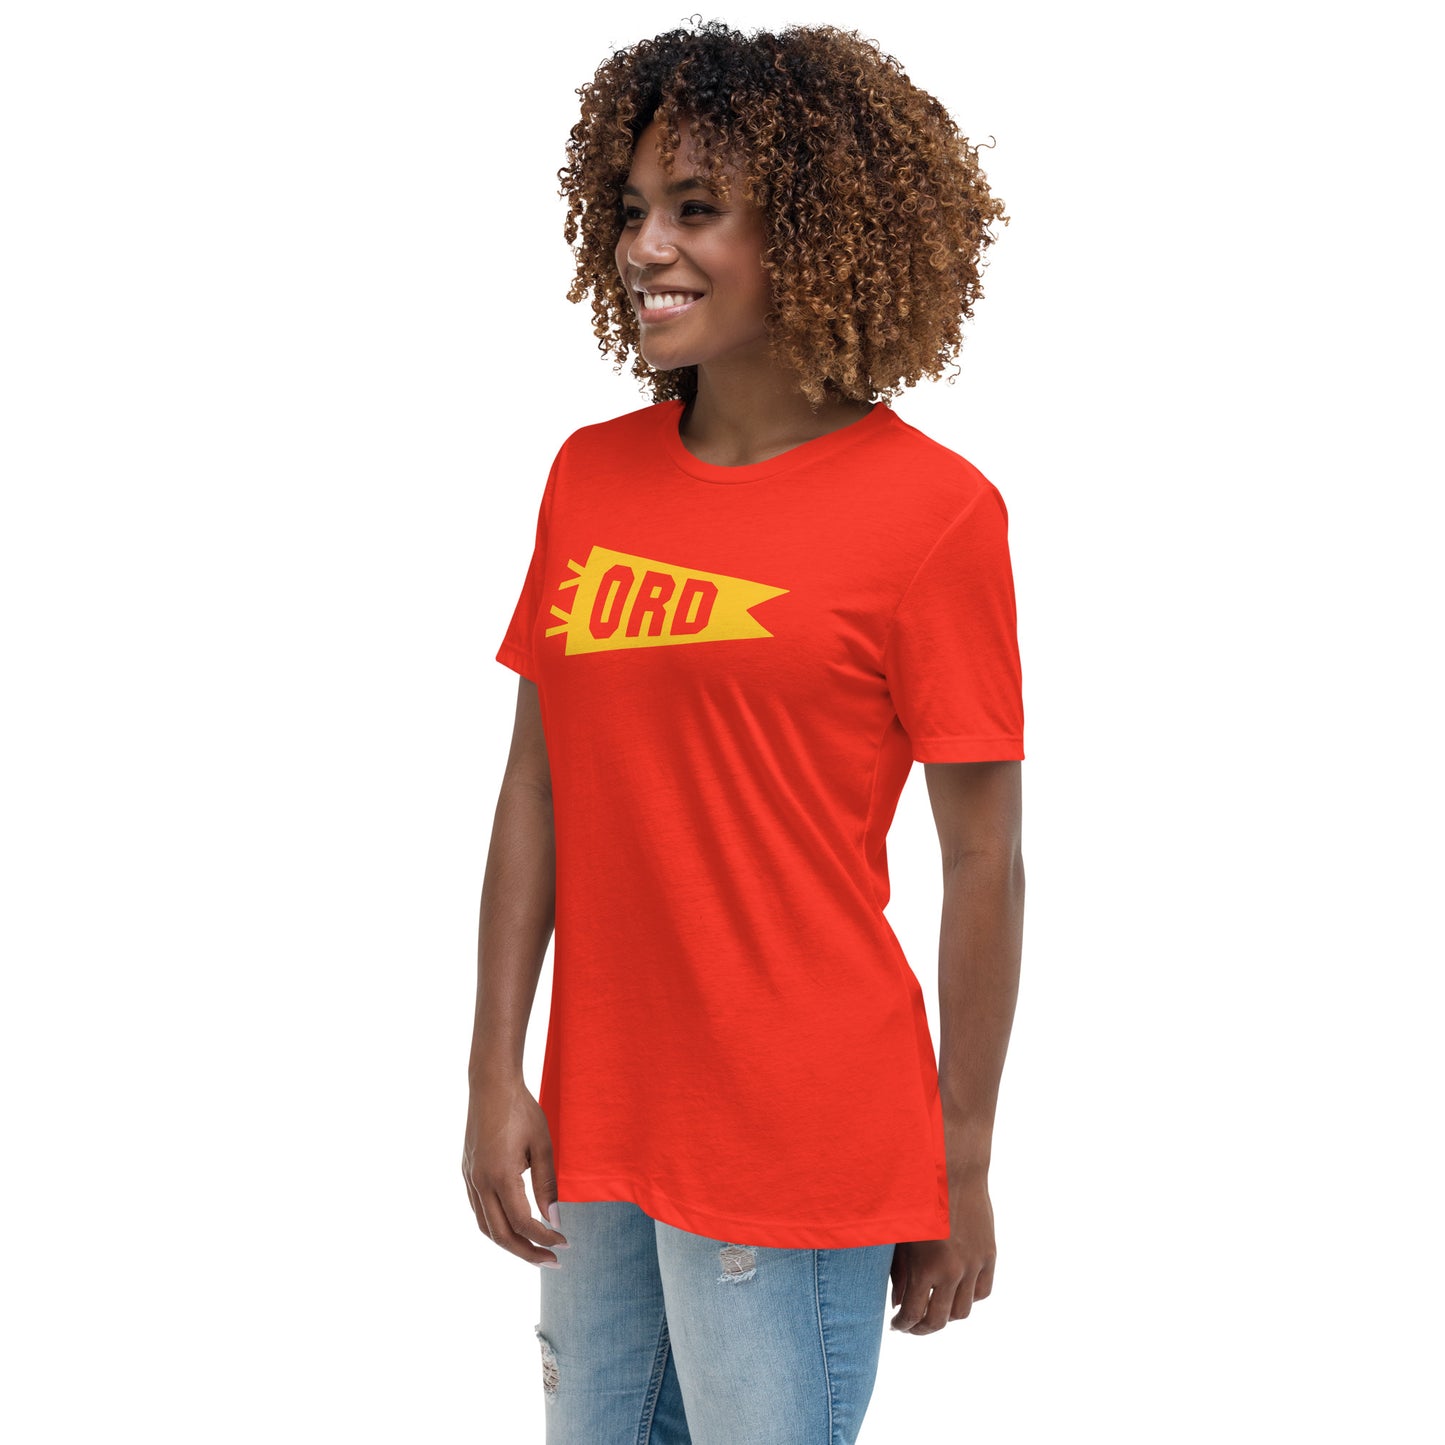 Airport Code Women's Tee - Yellow Graphic • ORD Chicago • YHM Designs - Image 04